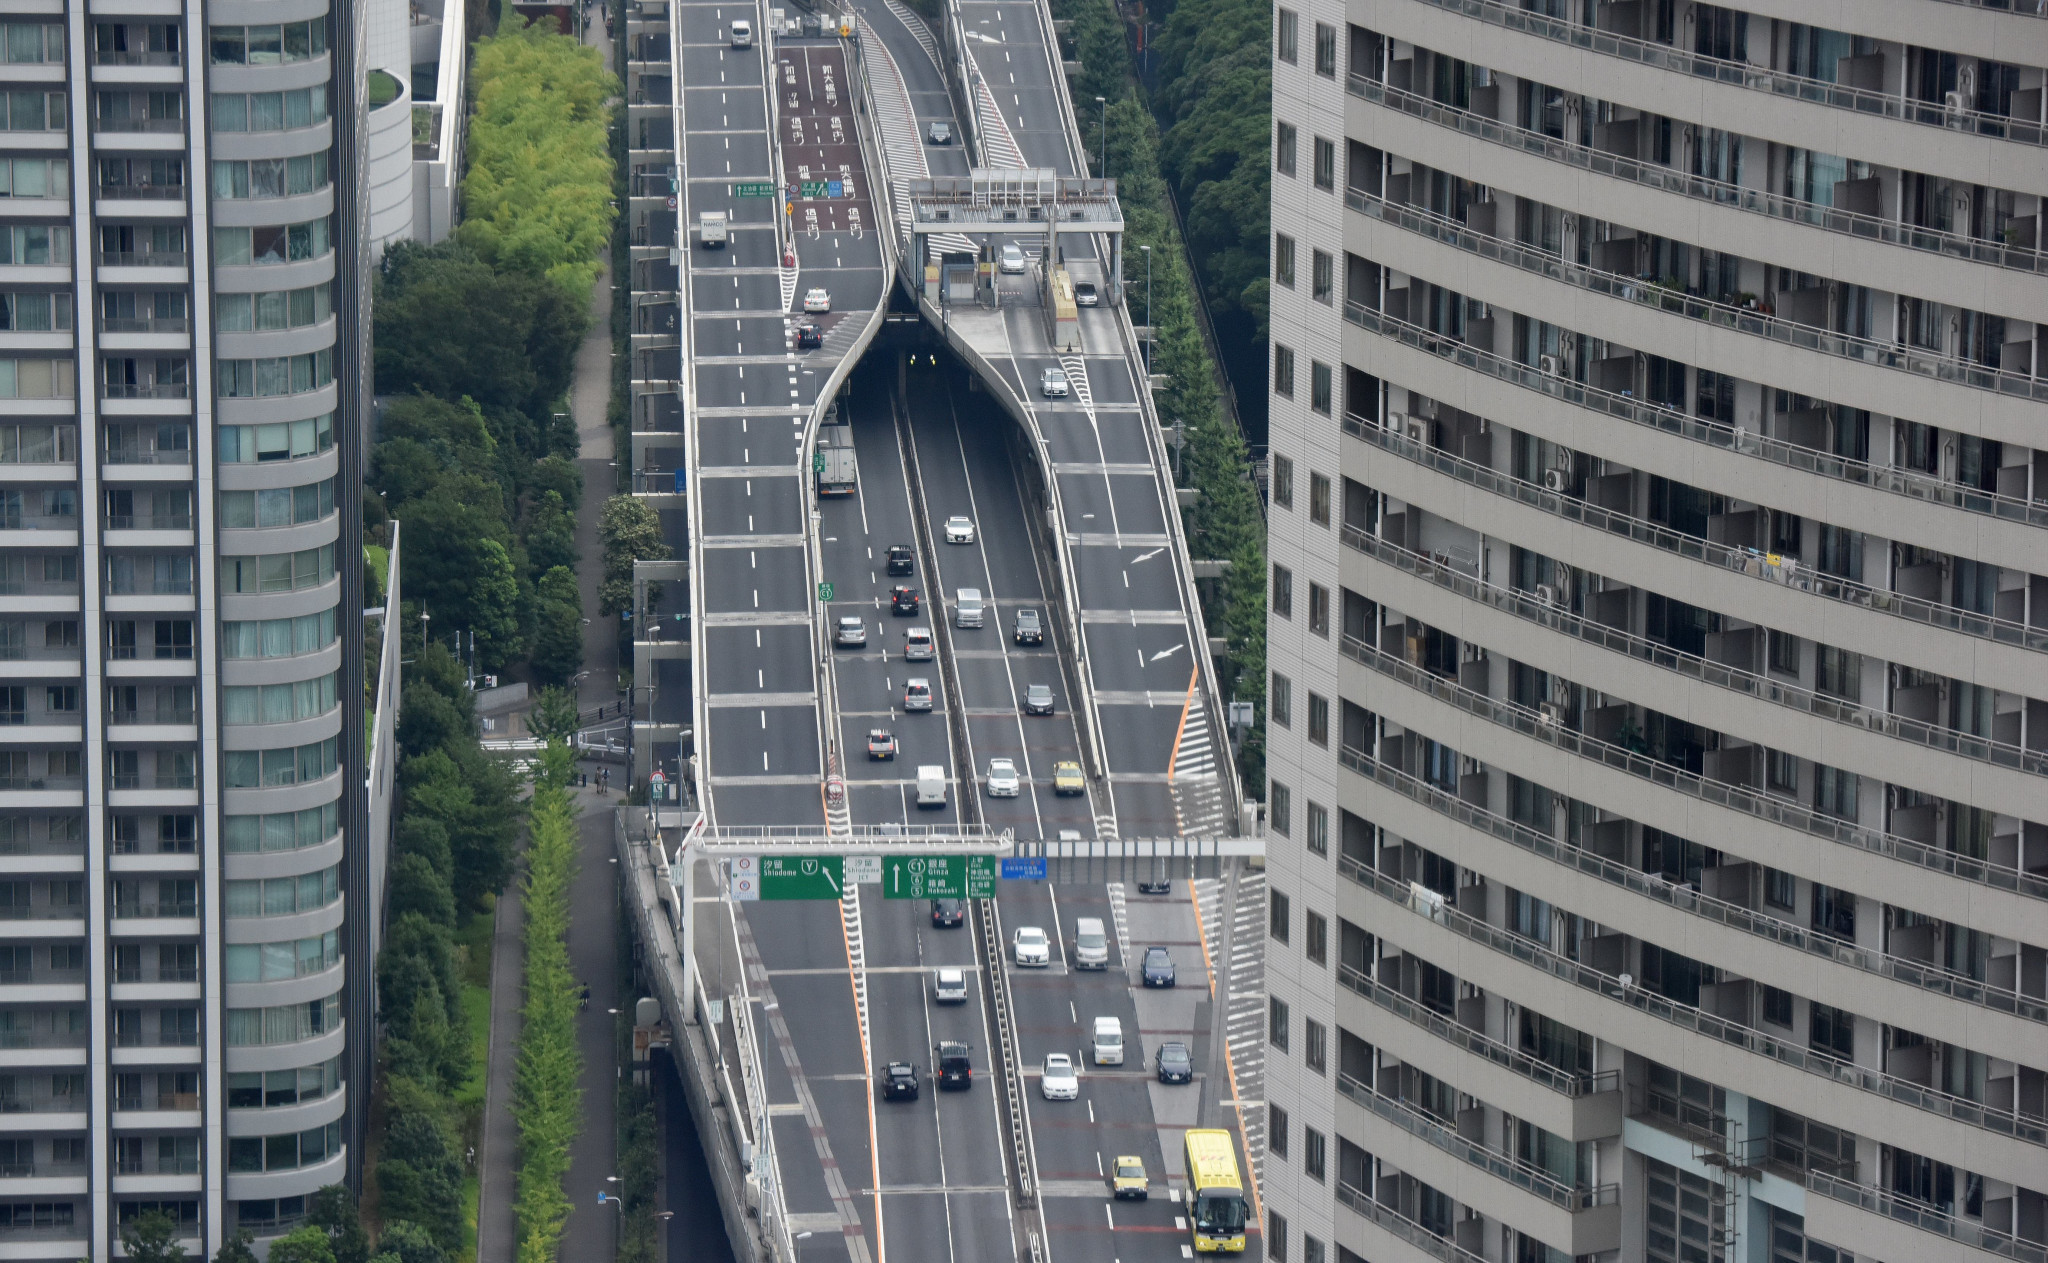 Plans prepared to increase toll surcharges for Metropolitan Expressway during Tokyo 2020 Olympic Games